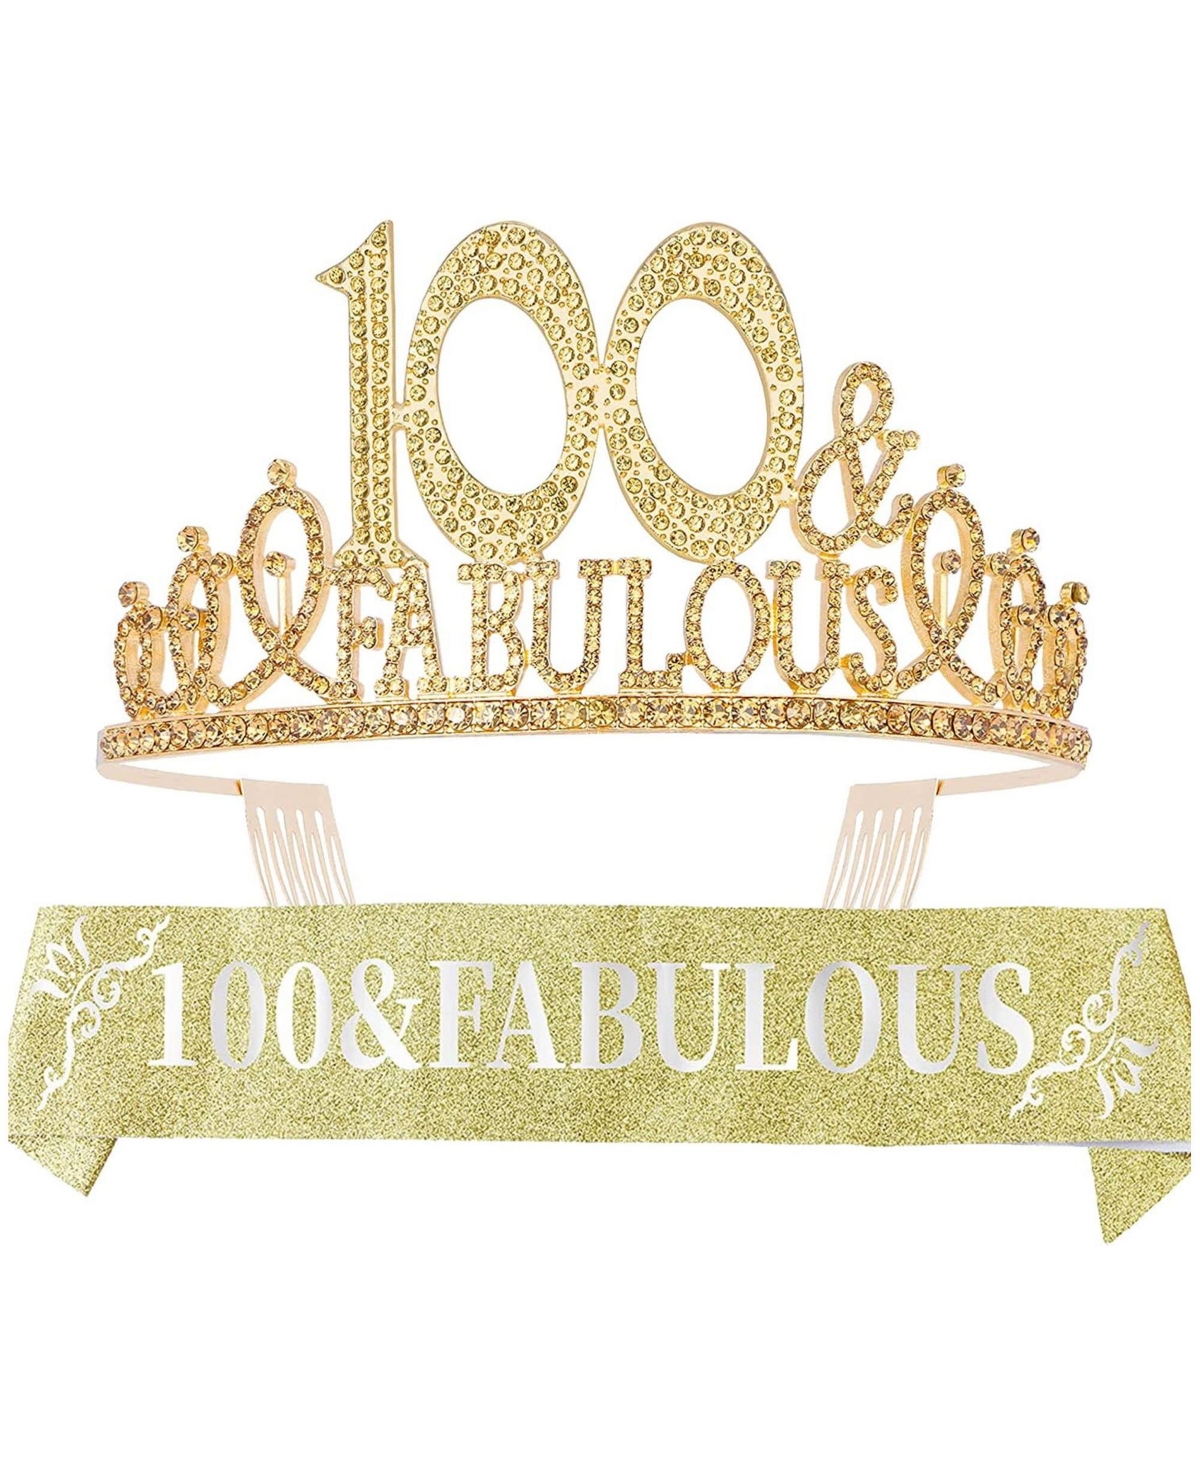 100th Birthday Gifts for Women, 100th Birthday Crown and Sash for Women, 100th Birthday Decorations for Women, 100th Birthday Party Favors, 100th Birt